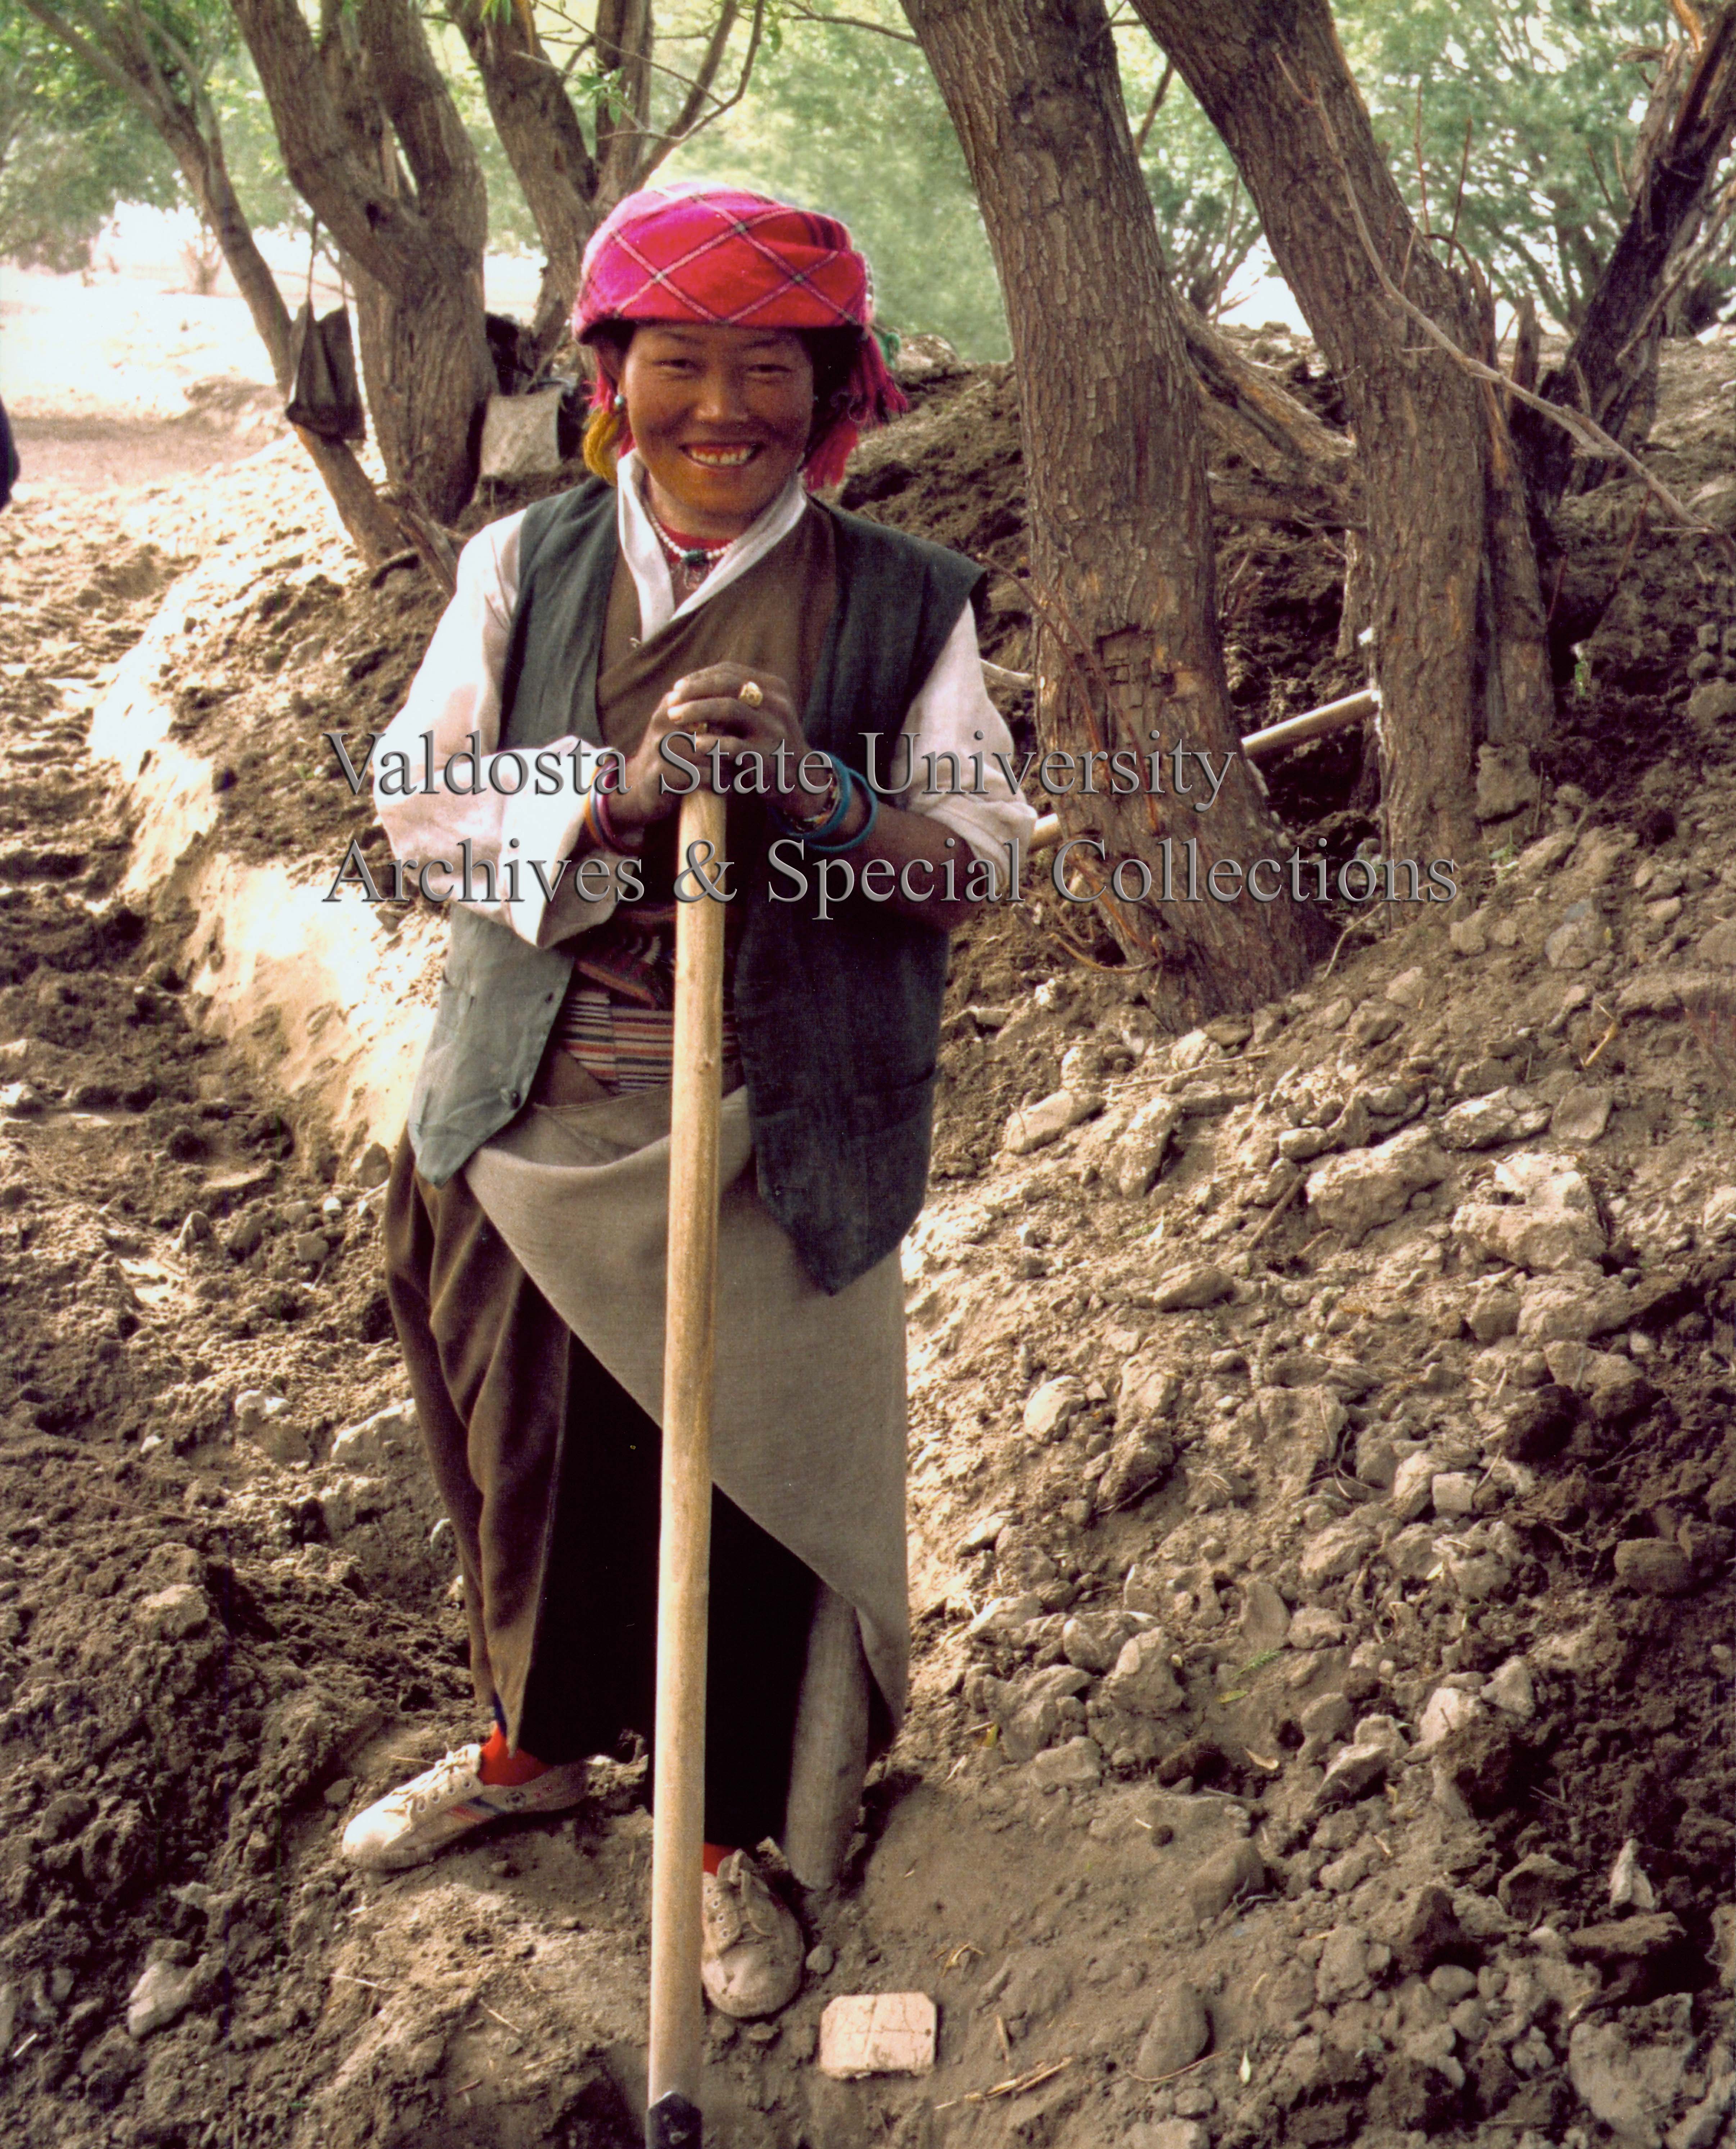 Woman with Shovel